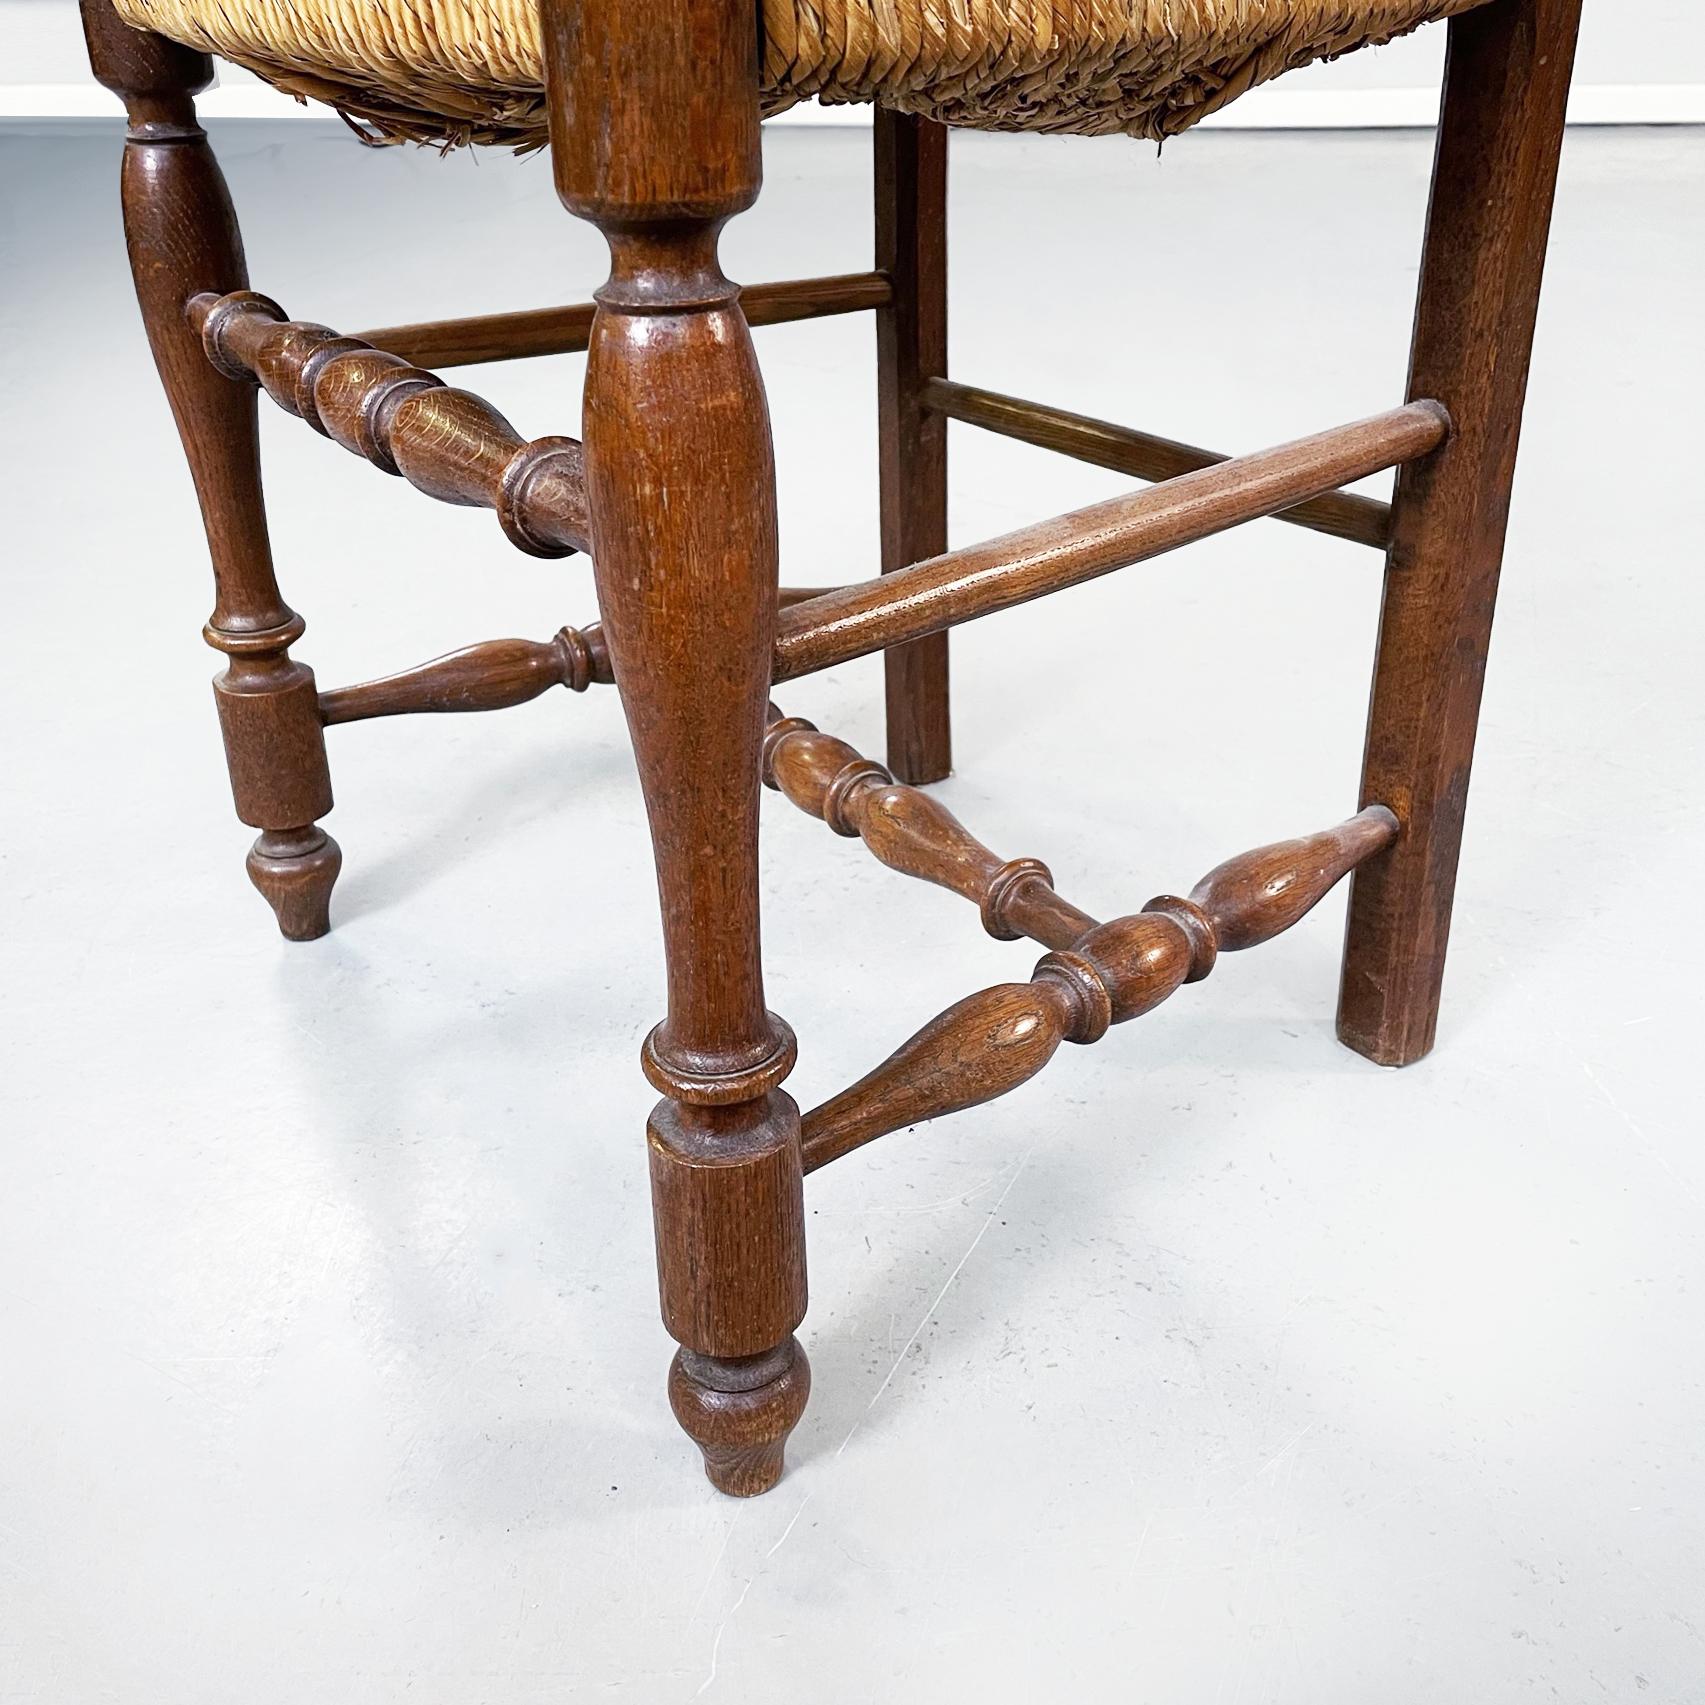 Italian Nineteenth Century Finely Crafted Wooden and Straw Chairs, Late1800s For Sale 9